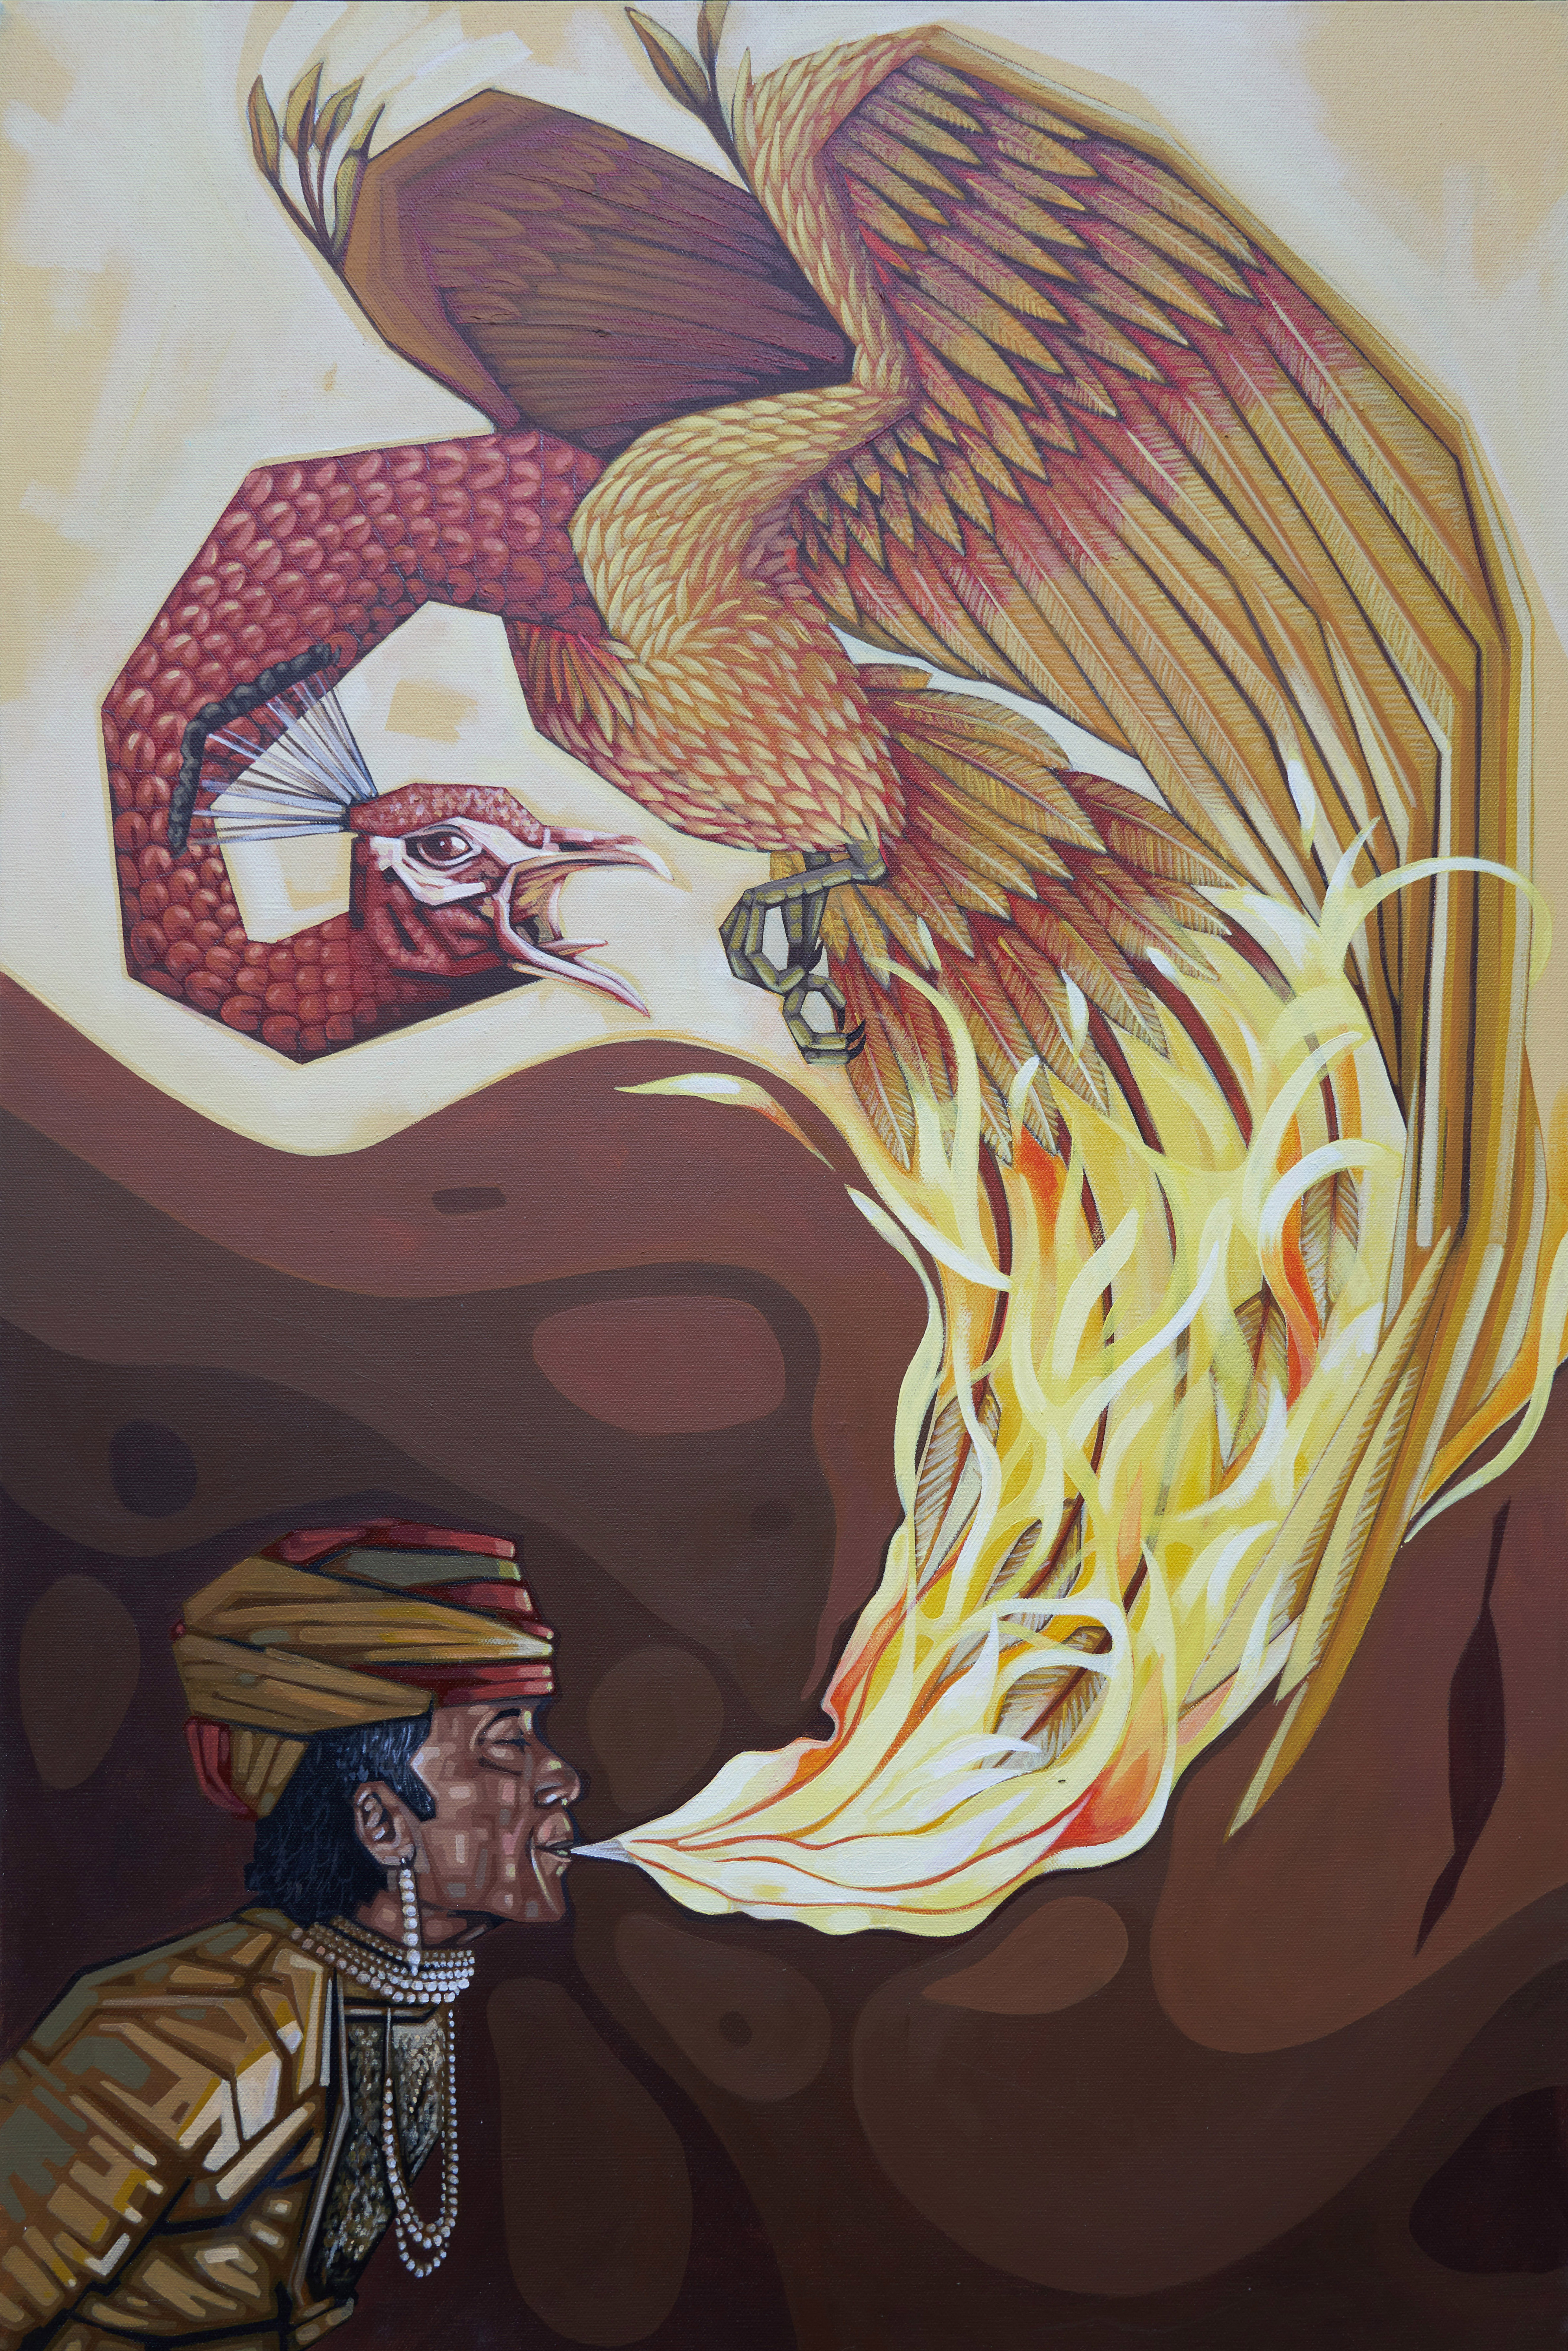 The Fire Eater and The Phoenix Bird by Carlos Mateu